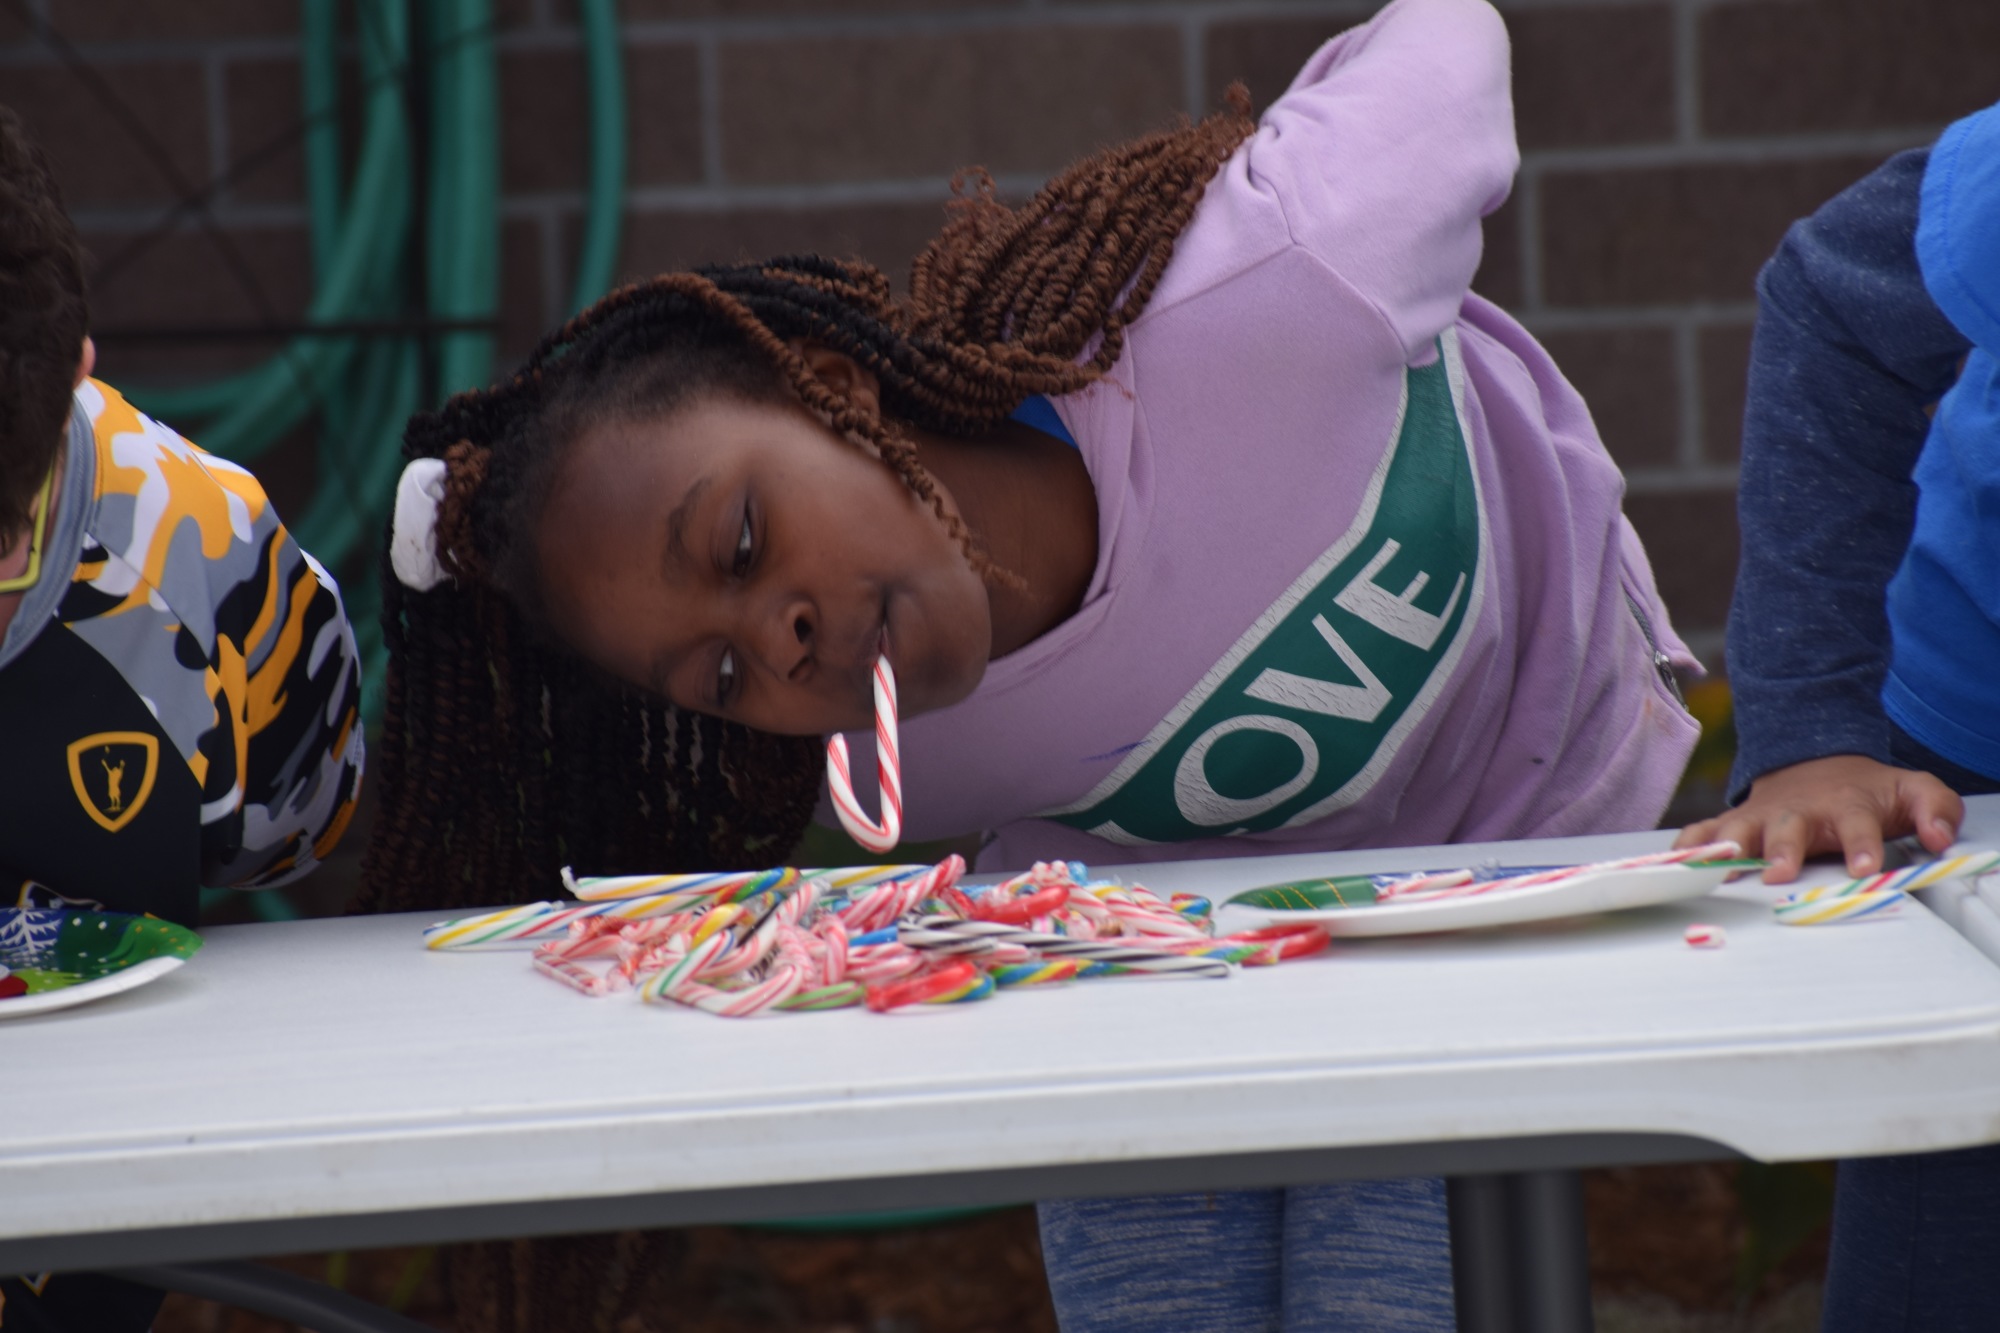 Kyla Smith-Bey, a fifth grader at Tara Elementary School, attempts to pick up as many candy canes as she can so she can win points for her house, Reveur.